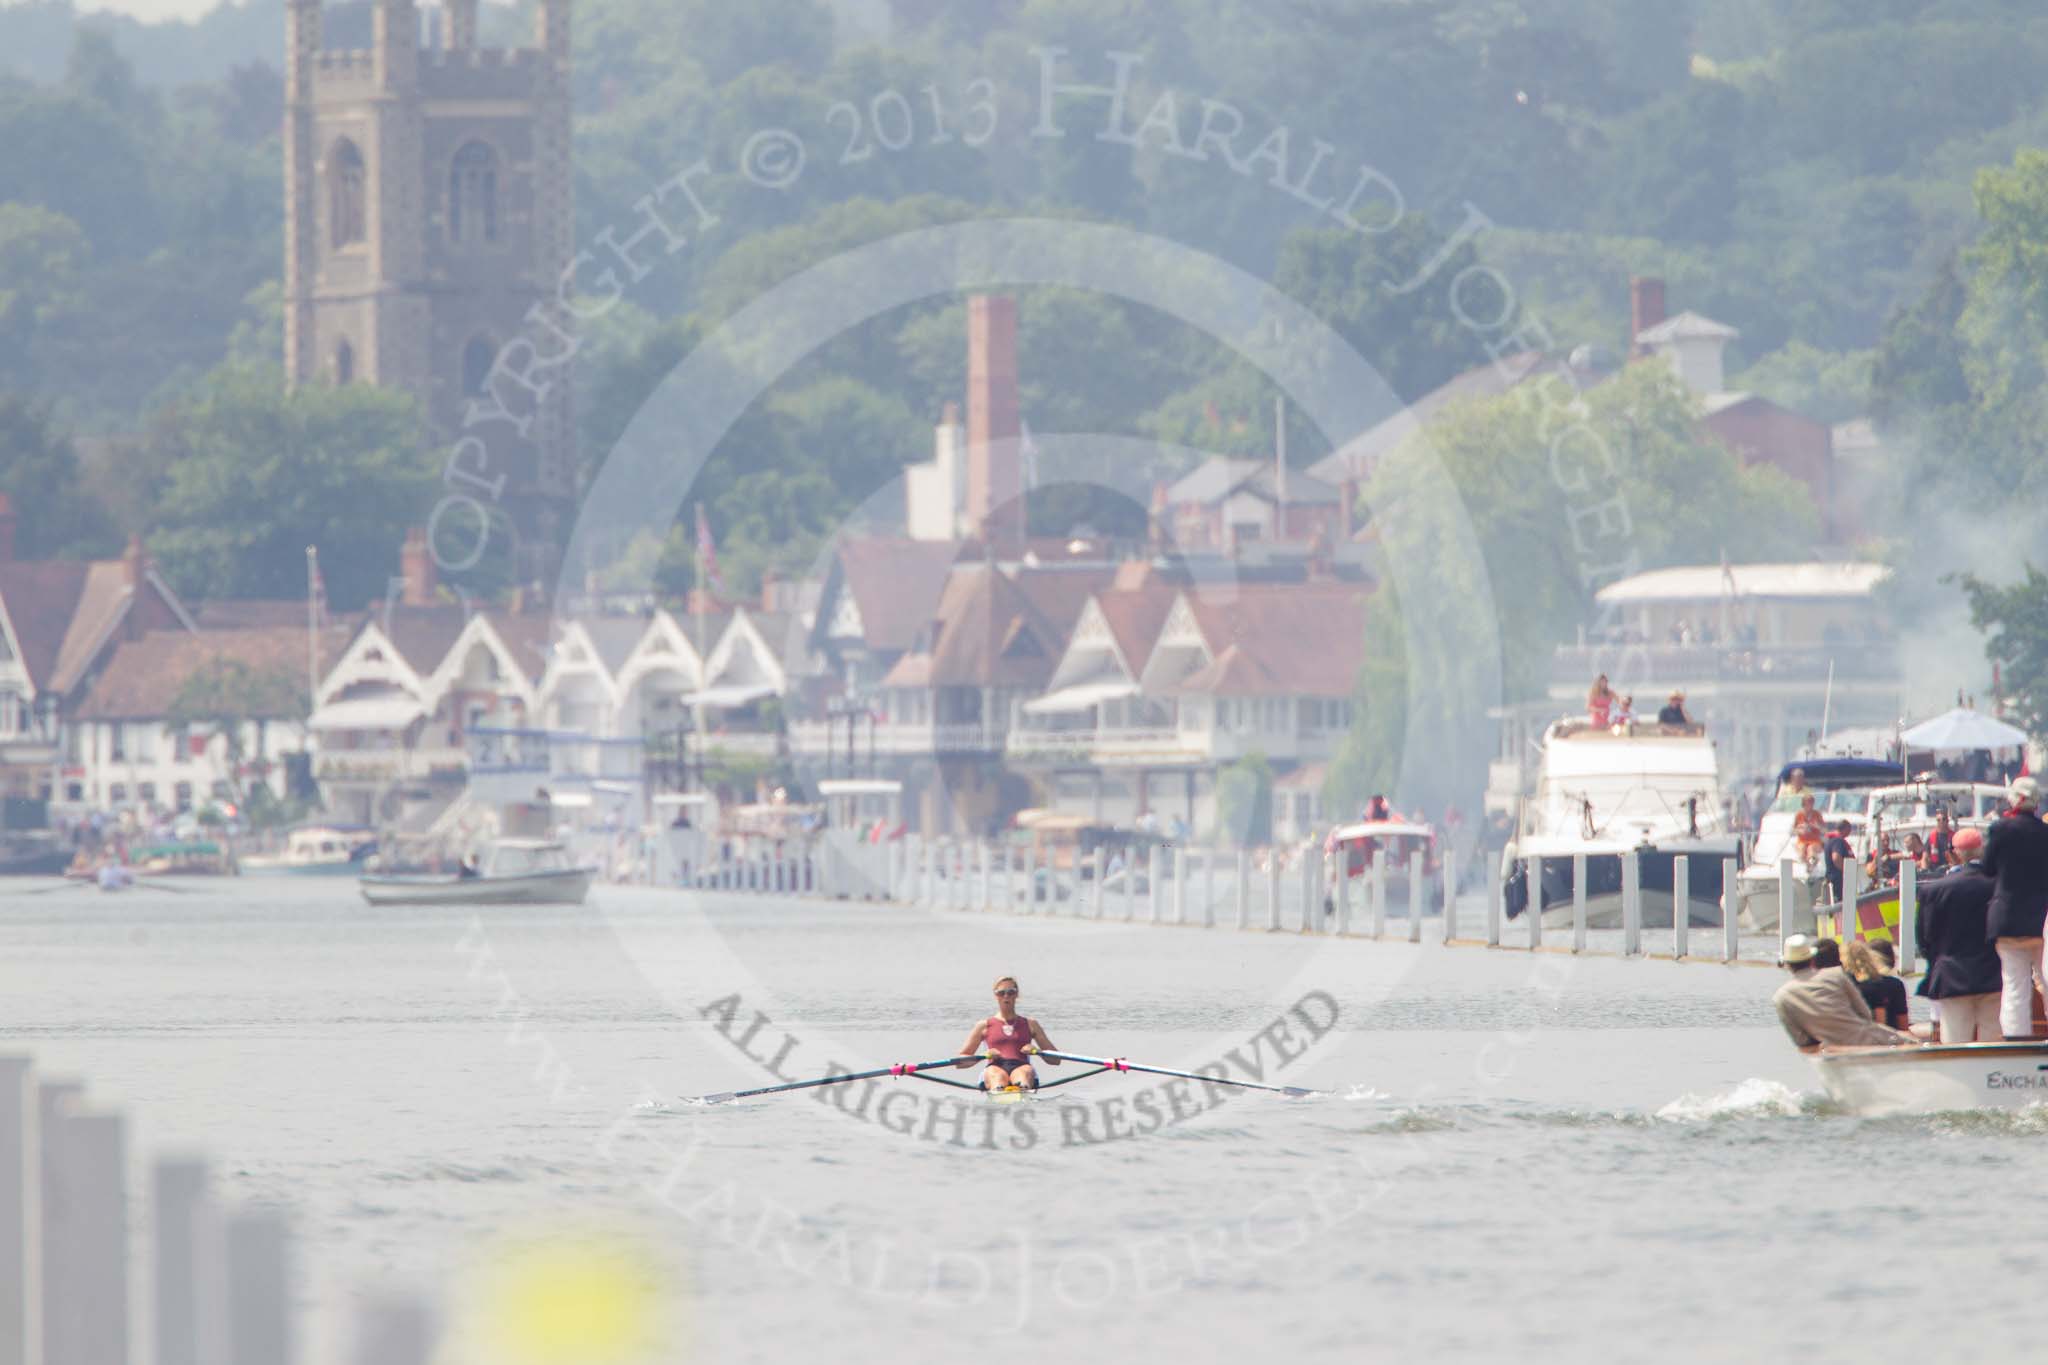 Henley Royal Regatta 2013, Saturday: Race No. 11 for the Princess Royal Challenge Cup, Victoria Thornley (Leander Club) v Emma Twigg (Waiariki Rowing Club, New Zealand), here Emma Twigg. Image #236, 06 July 2013 11:42 River Thames, Henley on Thames, UK